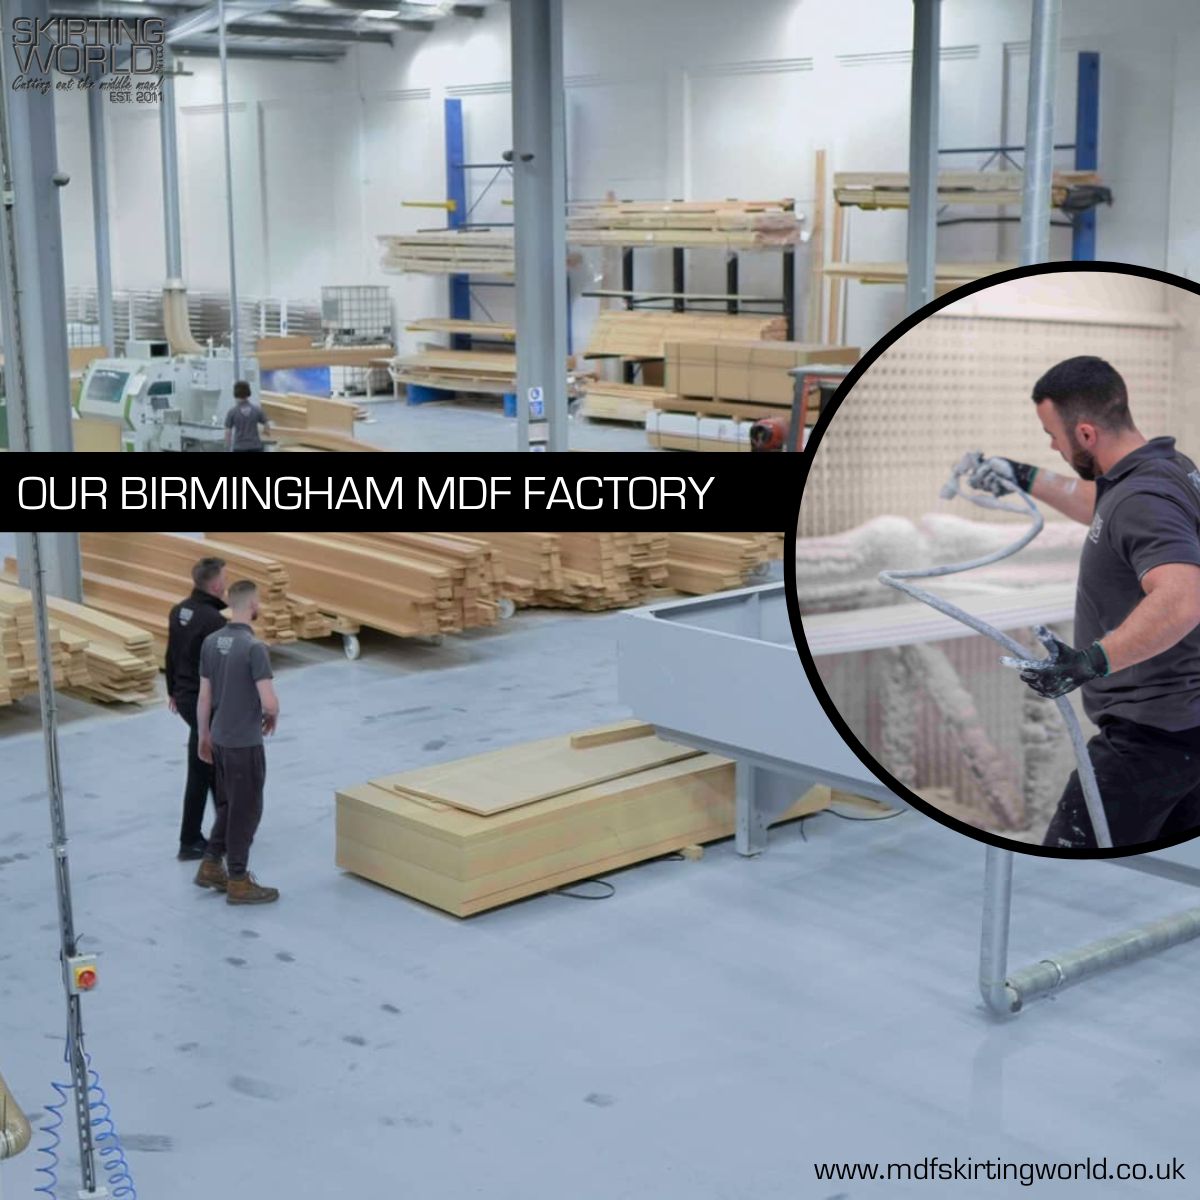 MDF factory showing fibreboards stacked up